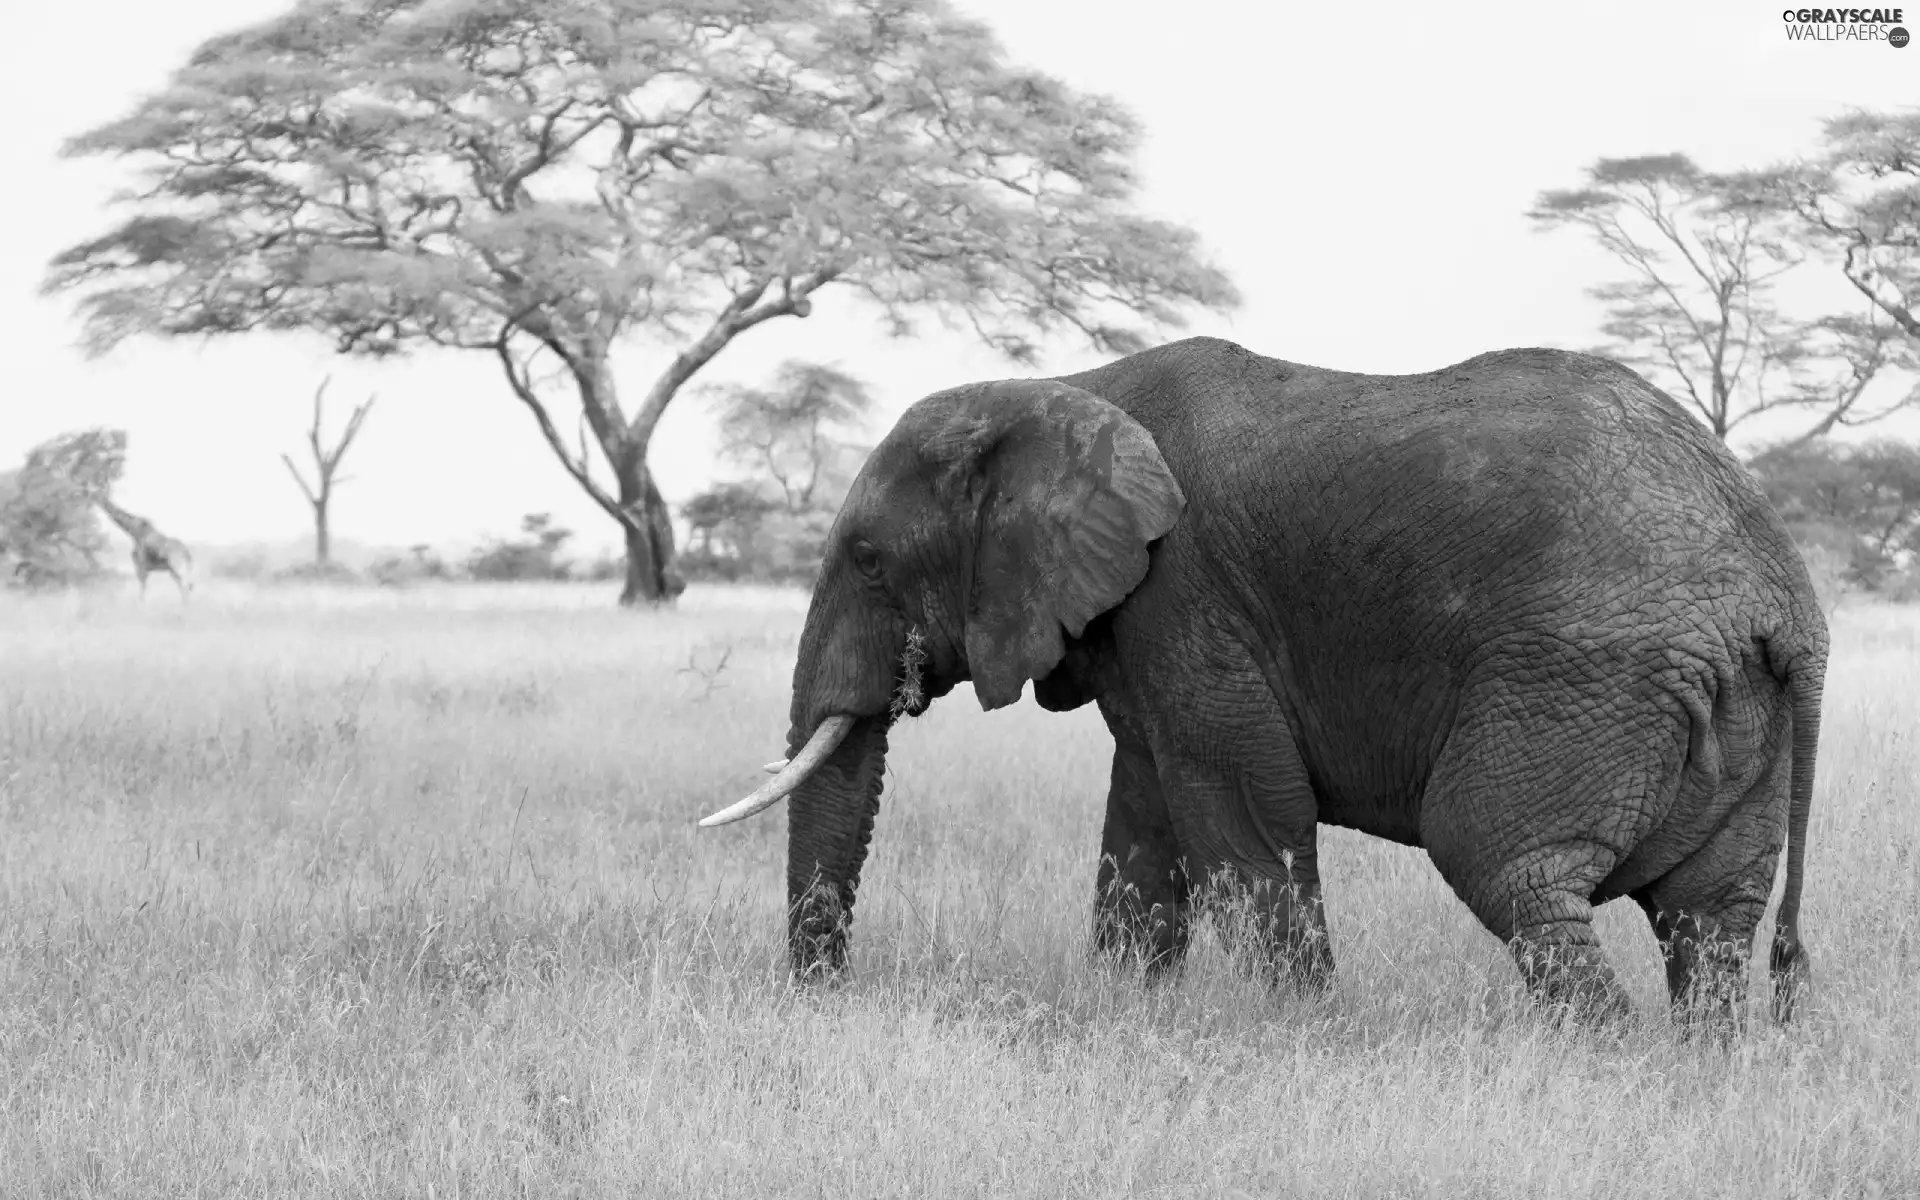 Elephant, viewes, grass, trees